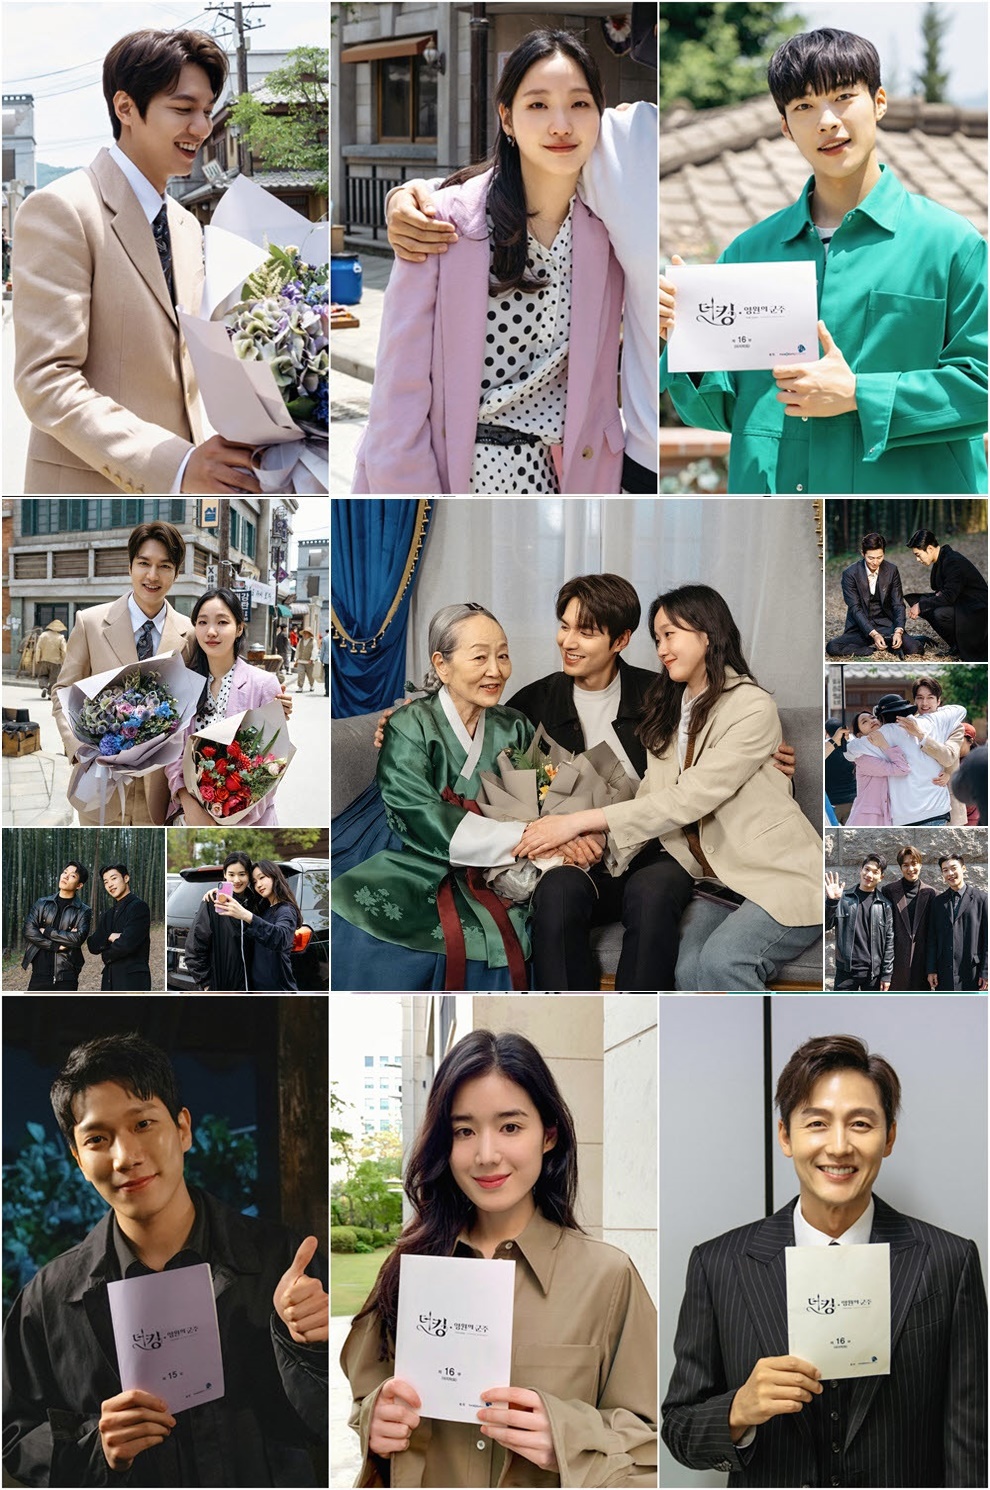 Before the final meeting, Lee Min-ho - Kim Go-eun - Udohwan - Kim Kyung-nam - Jung Eun-chae - Lee Jung-jin delivered an End Sentiment with a heavy impression.SBS gilt drama The King - The Lord of Eternity (directed by Baek Sang-hoon, Jung Ji-hyun/playplayplay by Kim Eun-sook Produced by Hua-dam Pictures) revealed the End testimony and the best name screen, which was directly cited ahead of the last broadcast on June 12 (Fri).I thanked the viewers who have been together so far and expressed my regret about the regret of finishing the work.Lee Min-ho, who played the role of Emperor Lee Gon of Korean Empire and showed a dignified appearance and serious performance, said that the eight-month long journey will remain in Memory for a long time. This work is a work that started as an actor in his 30s and is likely to be Memory as a nourishment time to decorate a page in the future.I would like to thank the fans and viewers who have been waiting for a long time, thanking them for their new relationship and new relationship. Lee Min-ho, after Lee went to the Korean Empire for the first time with Jung Tae-eul, said, I am the emperor of the Korean Empire and my name is Igon. He added, I want to be healthy and healthy at this time, and I hope you walk the path you chose nicely.I will also do my best every moment and take a step firmly. Kim Go-eun, who played his life with South Korea Detective Jeong Tae-eul and Korean Empire criminal Luna, said that the eight-month long journey was passing by, It was a short time, but it was really fun.I remember a lot of time when I laughed and played with the staff as well as the coaches and actors. In addition, Kim Go-eun, who selected the blood-bomb reunion scene, which was broadcast 11 or 12 times as a famous scene, said, It was a scene taken all three days in Busan, so I stayed in Memory and felt good because the viewers liked these scenes.Thanks to every word of the audience who are watching it with fun, I was able to shoot it all the way through.I will say good-looking and better work next time. He added, I will see if Jung Tae-eul and Igon will meet again with the last watch point.Udohwan, who fully played the two roles of the Korean Empire Guard Captain Cho Young and South Korea Social Service Agent Cho Eun-seop, said, Thanks to the writers, bishops, and senior actors who have communicated a lot ahead of the last meeting, I was able to play fun.I was more grateful to the viewers for their good reaction. Udohwan, who selected the first meeting between Cho Eun-seop and Cho Young in the 7th, expressed his meaningful heart, saying, I prepared really hard because it is a scene that shows the narrative and character characteristics of each other accumulated from the 1st to the 6th.Before seeing the last episode, which has a lot of elements that stimulate curiosity, Udohwan, who recommended Jung Ju-haeng, who sees it again from the first episode, said, I ran from the first shooting to the last shooting, but it was a good script and a good scene that I did not really want to rest.I will continue to show my progress to viewers and fans as much as possible, and I am really grateful for your love. Kim Kyung-nam, who showed a heavy presence as a parallel world hidden card and South Korea homicide team Detective Kang Shin-jae, said that he did not realize that the preparation period was long and that he was happy to be able to live as a person named Kang Shin-jae.It was a pleasant work with good people. Above all, I am grateful to both viewers who loved The King - Eternal Monarch and all of you who loved Kang Shin-jae in it. Kim Kyung-nam, who selected the 8th ending, which Lee Gon and Jung Tae-euls beheading kiss and Lee Gon told Kang Shin-jae, Maybe I am your master, as a masterscene, said, It will be a satisfactory ending for everyone.I appreciated you for loving our work and I will give you a better look. Jung Eun-chae, who showed the spectrum of acting as the youngest Korean Empire and the first female prime minister, Seo-ryong, said, I am grateful to Kim Eun-sook, who presented a wonderful character called Gu Seo-ryong, the directors, staff, I expressed my regret.Jung Eun-chae, who selected the seventh ending, which was the first meeting between Chun-Joon Goscene and Gu Seo-ryong and Luna, who led the start of the drama, explained, When I met Luna, confusion in many meanings was heightened and Gu Seo-ryong started to experience the door of two dimensions directly.I think that many viewers from Korea and overseas have been able to finish this drama well because they expected and saved many characters from Korea and abroad before the start of the show.I would like to thank you and say good work, and I hope you will always be careful about your health. Lee Jung-jin, who transformed into the most intense Billon in Actor 22 years as a Korean Empire goldsmith, said, I studied my first character, but I have a lot of fun because I have worked hard and have a pleasant and memorable role.It seems to be a work left in Memory as an actor. Lee Jung-jin, who said that Lee and Lee were more attached because they were filled with the desire of Lee and Lee, who had been facing the 9th ending Haeundae scene and the first meeting scene of Lee and Lee Sung-jae.Lee Jung-jin, who said in the last episode, I hope you will see if this will prevent the coming and keep the situation, said, Thank you again for watching and cheering in difficult and difficult times.I will go to the character that remains in Memory like Irim by preparing more and refining. I give my unrelenting gratitude to the writers, directors, actors, and all staff who have worked hard for a long time in a single heart and a heart to convey a new and mysterious story to viewers, said the producer, Hwa-dam Pictures. I want you to see what beautiful answers you can give at the final meeting of The King-Eternal Monarch.On the other hand, SBS; The King - The Lord of Eternity final meeting will be broadcast on Friday, June 12 at 10 pm.